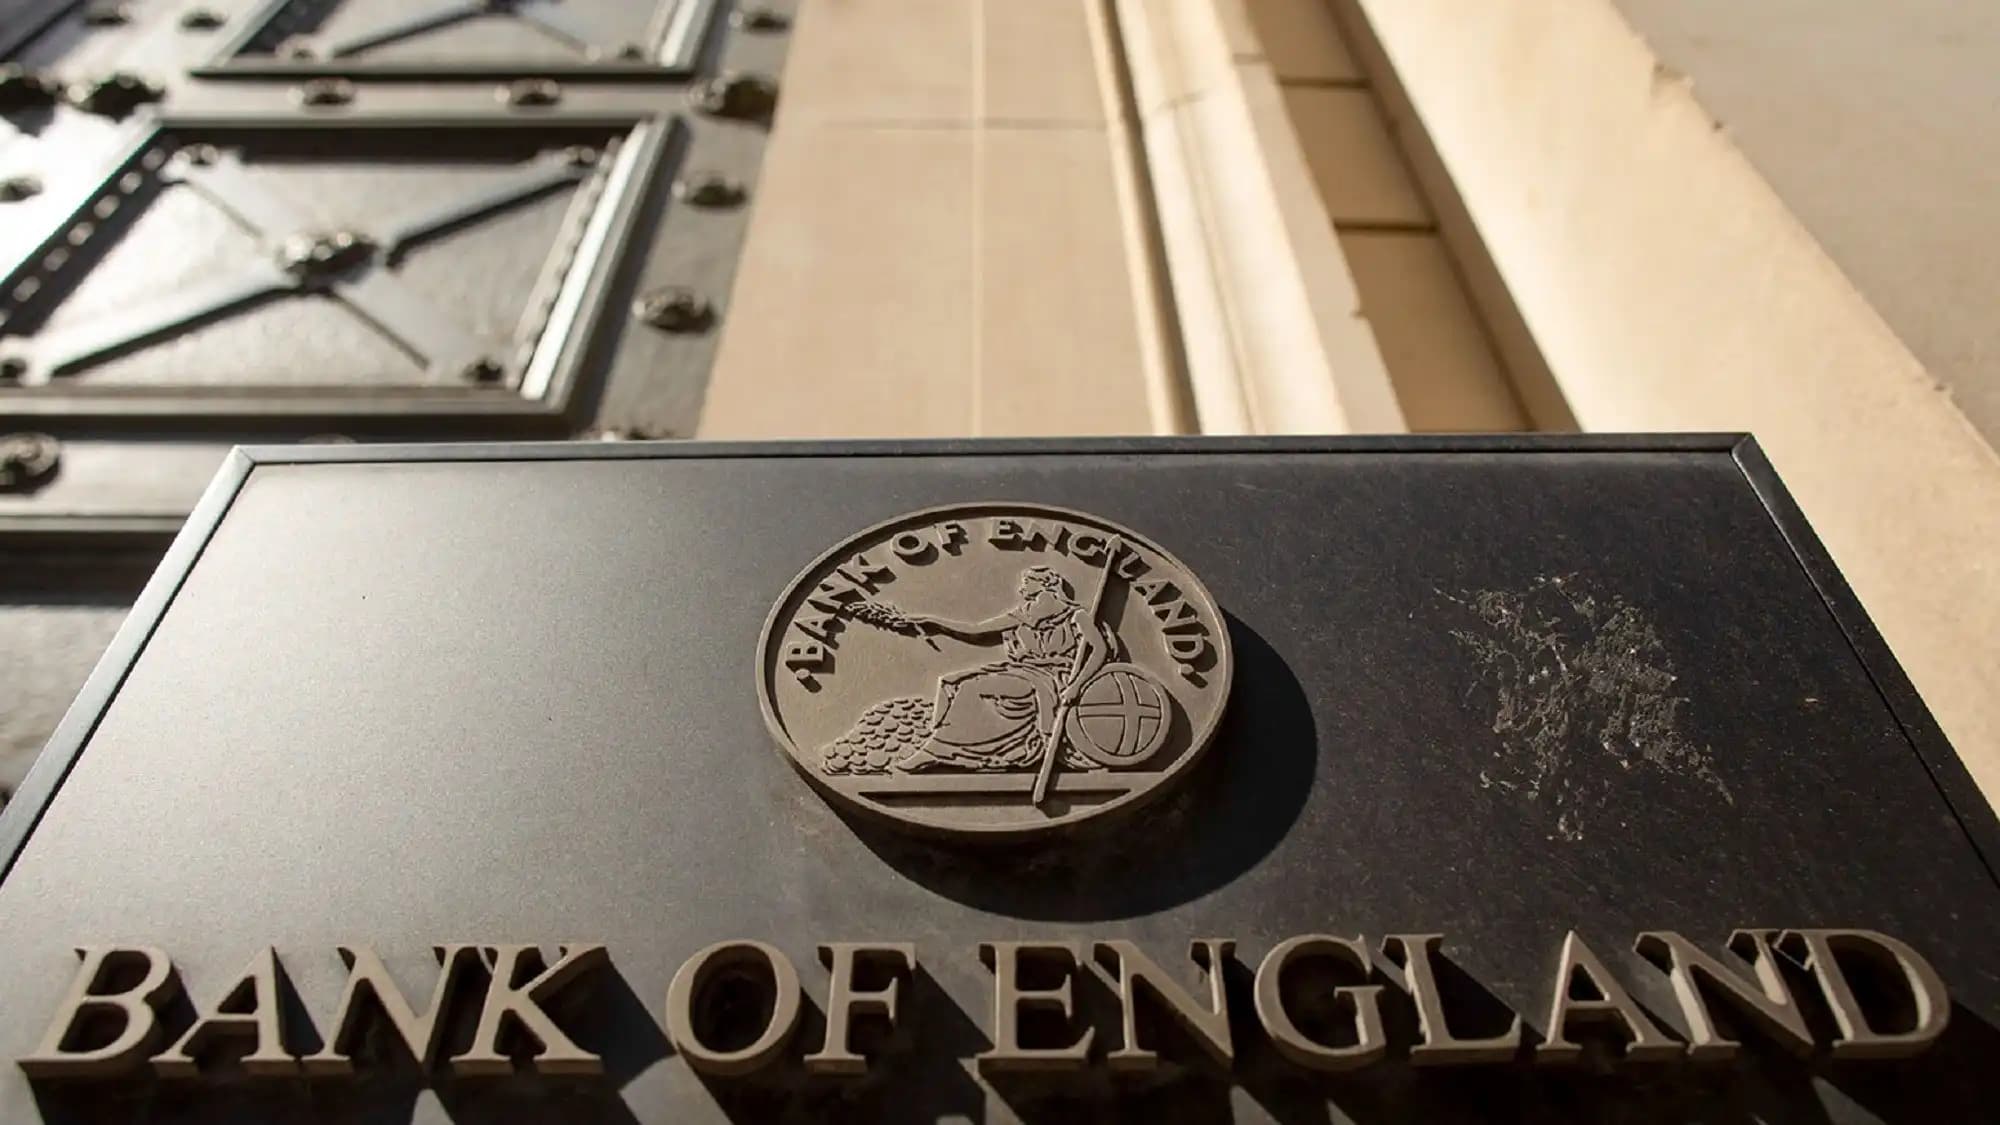 Factors affecting the meeting of the Bank of England